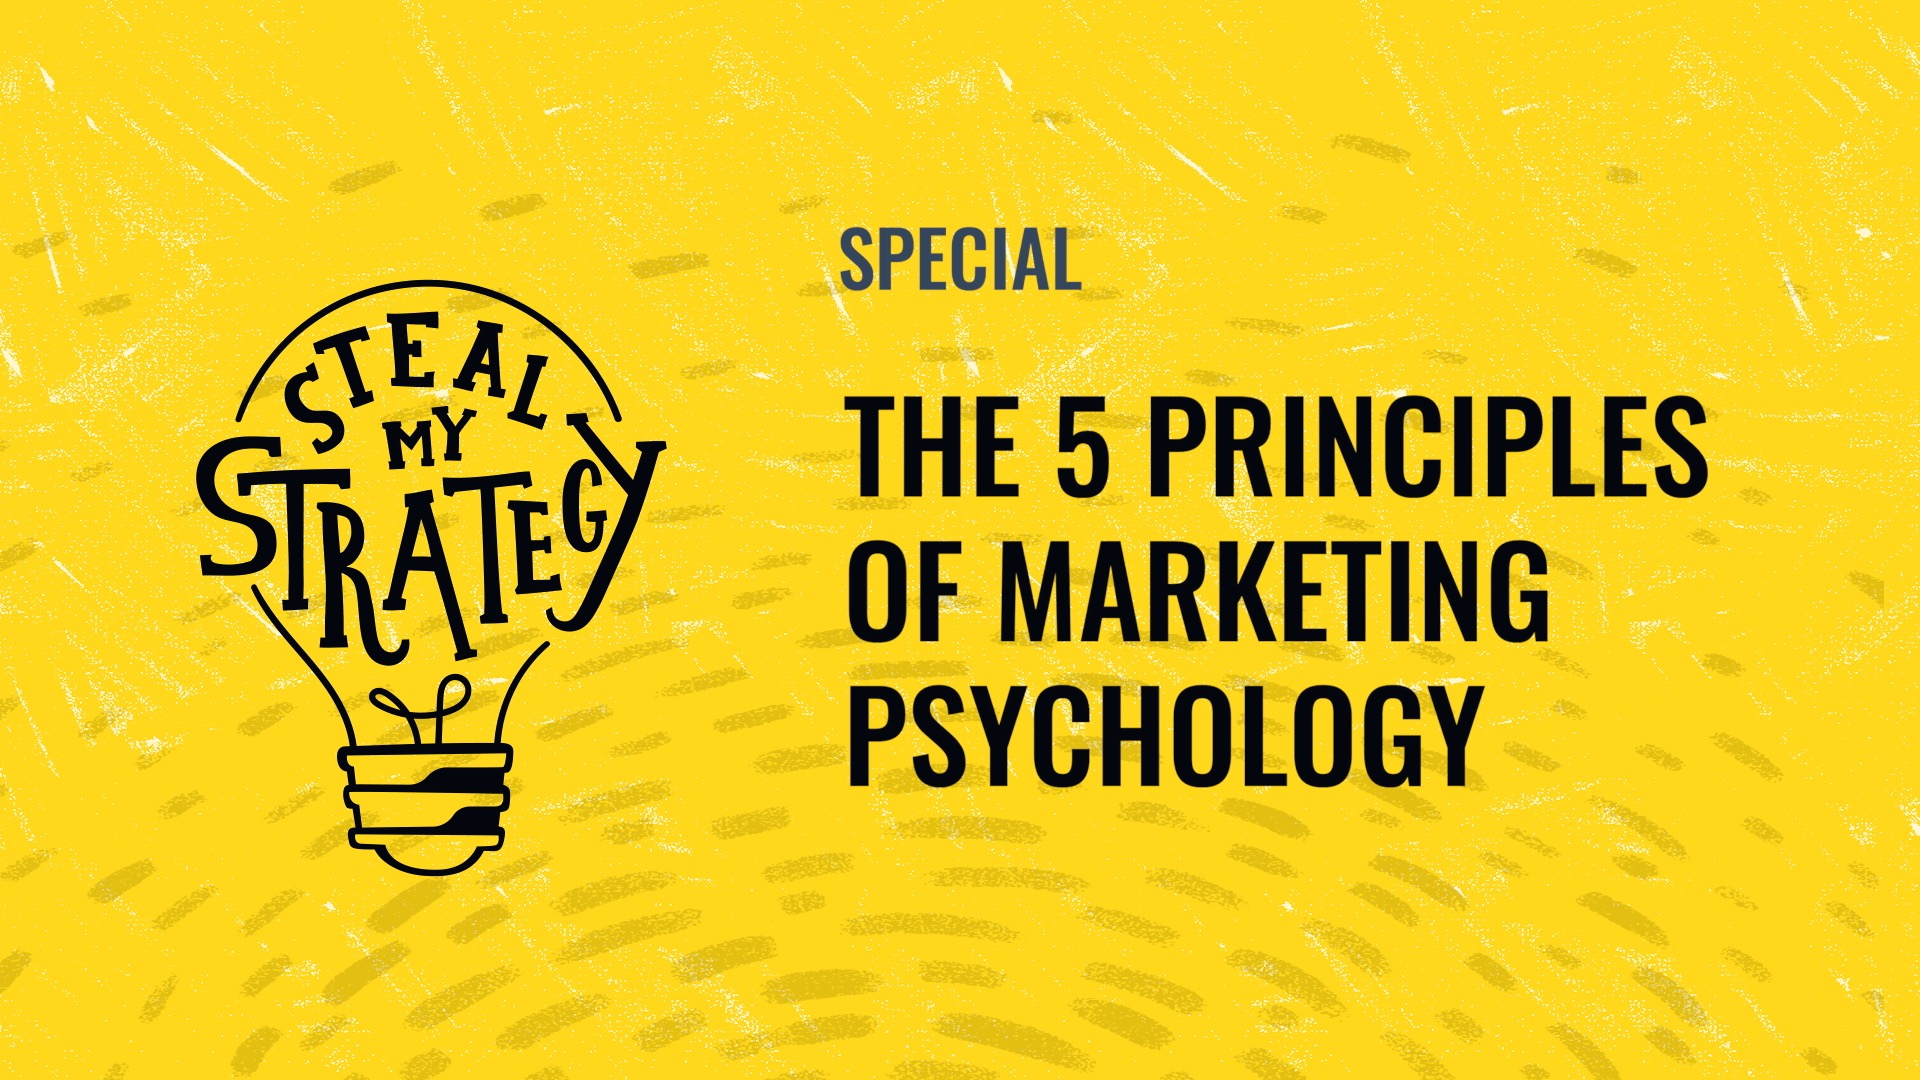 Steal My Strategy SPECIAL: The 5 Principles of Marketing Psychology